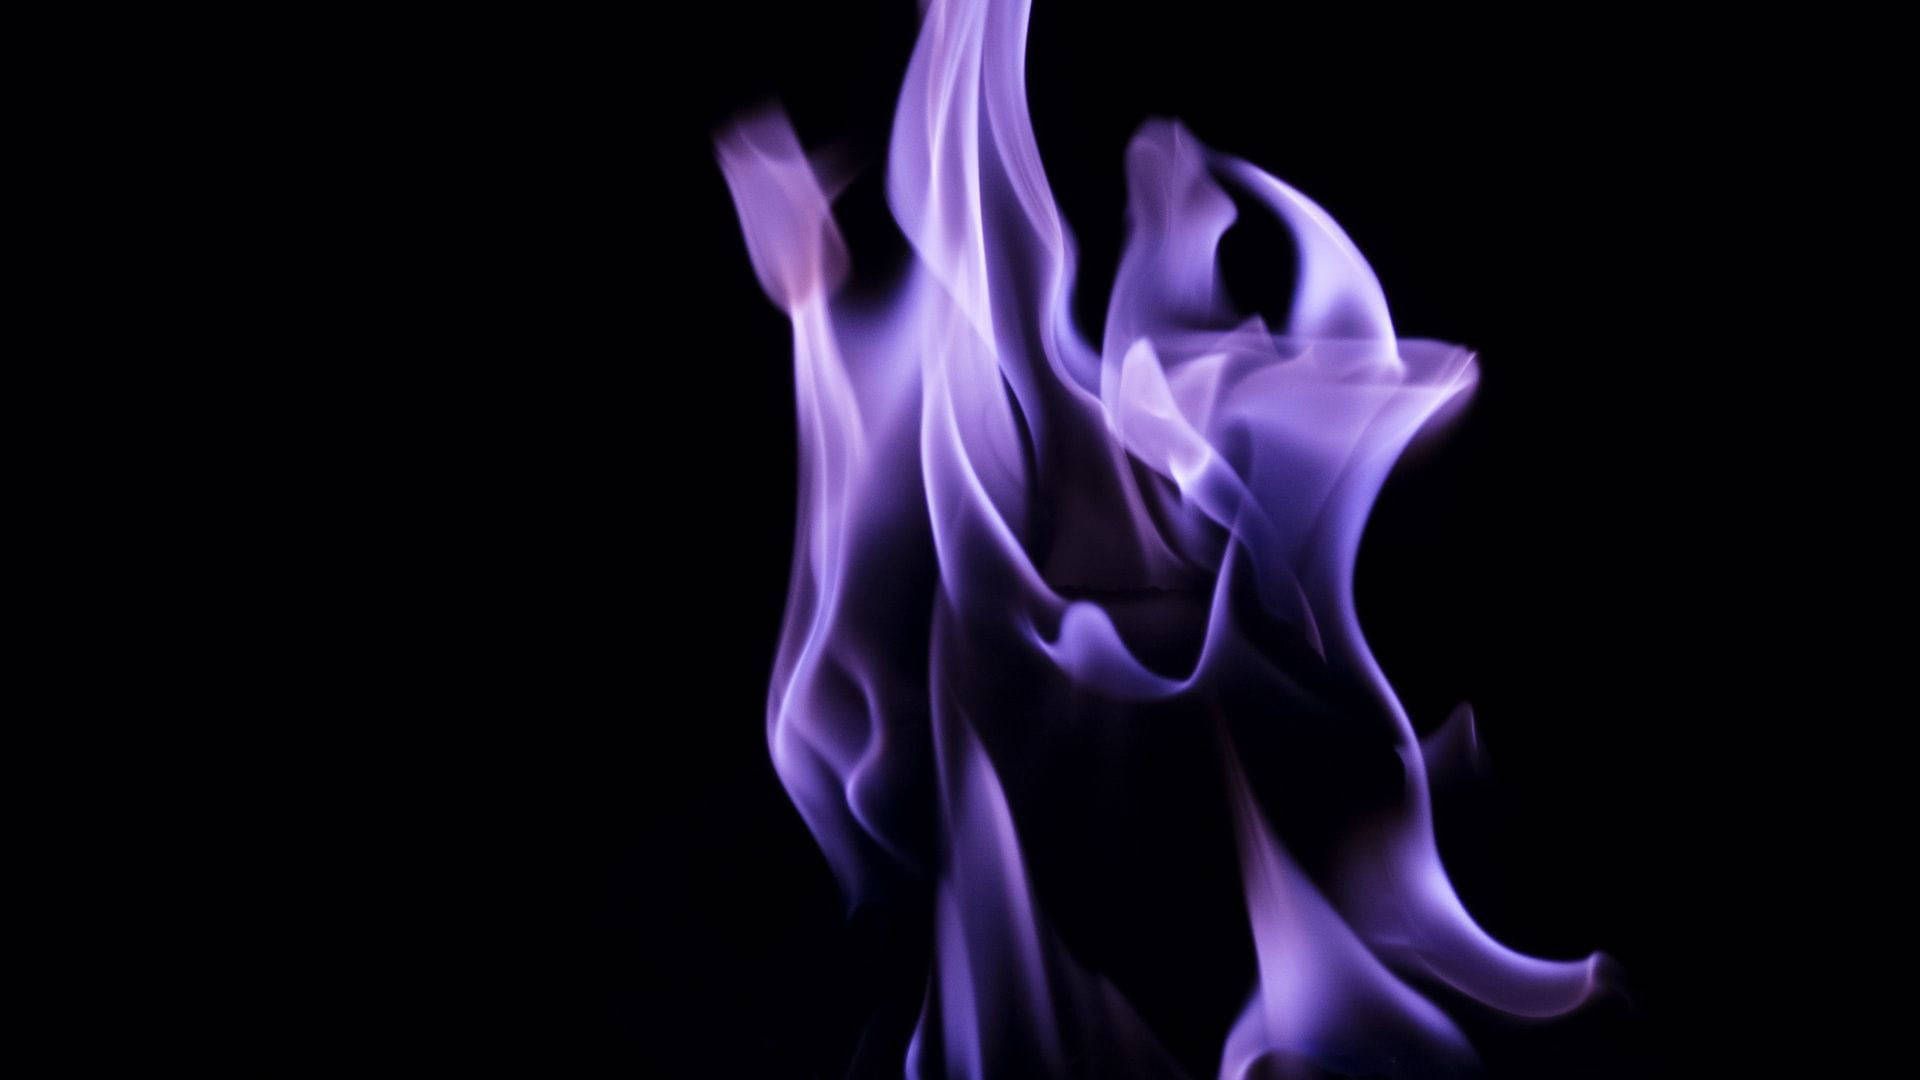 Download Black And Purple Aesthetic Burning Fire Wallpaper